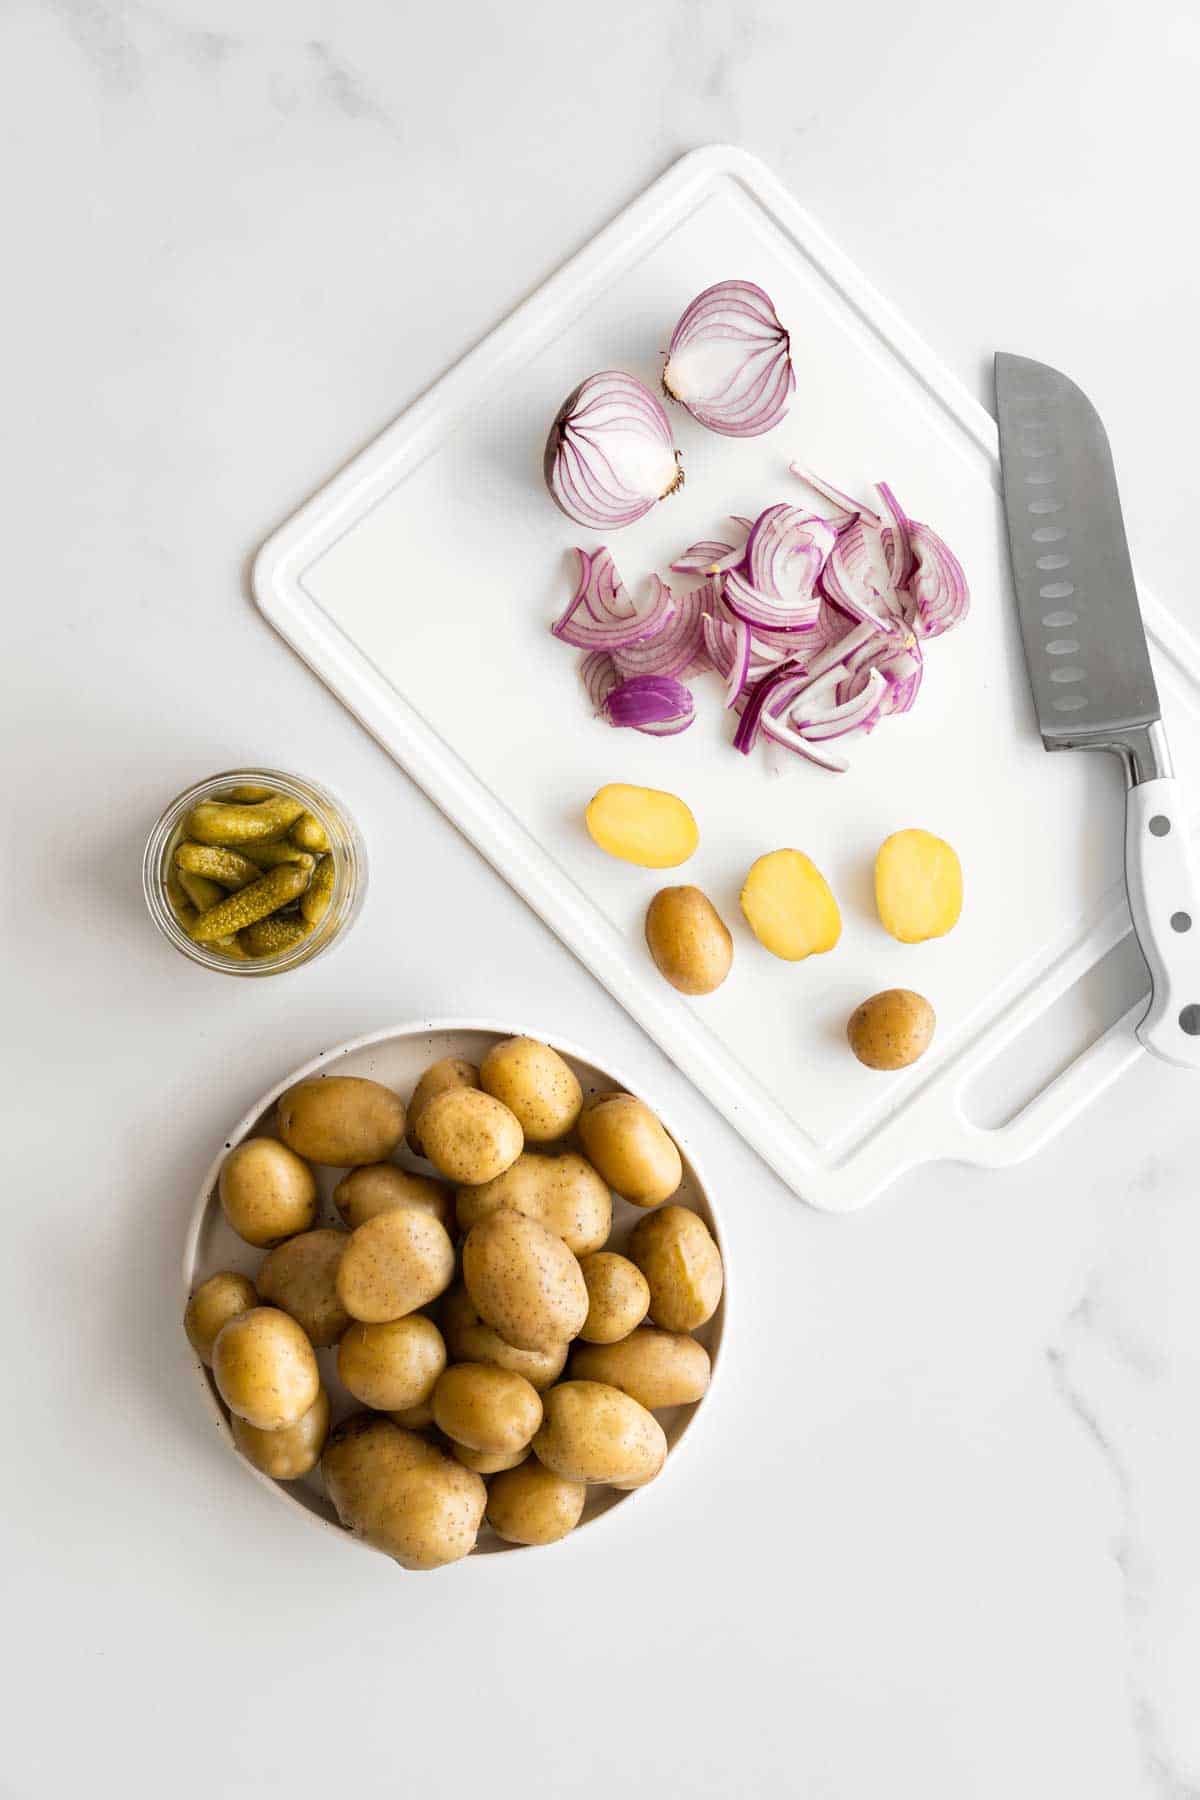 Ingredients for pickle potato salad on a chopping board with a knife.